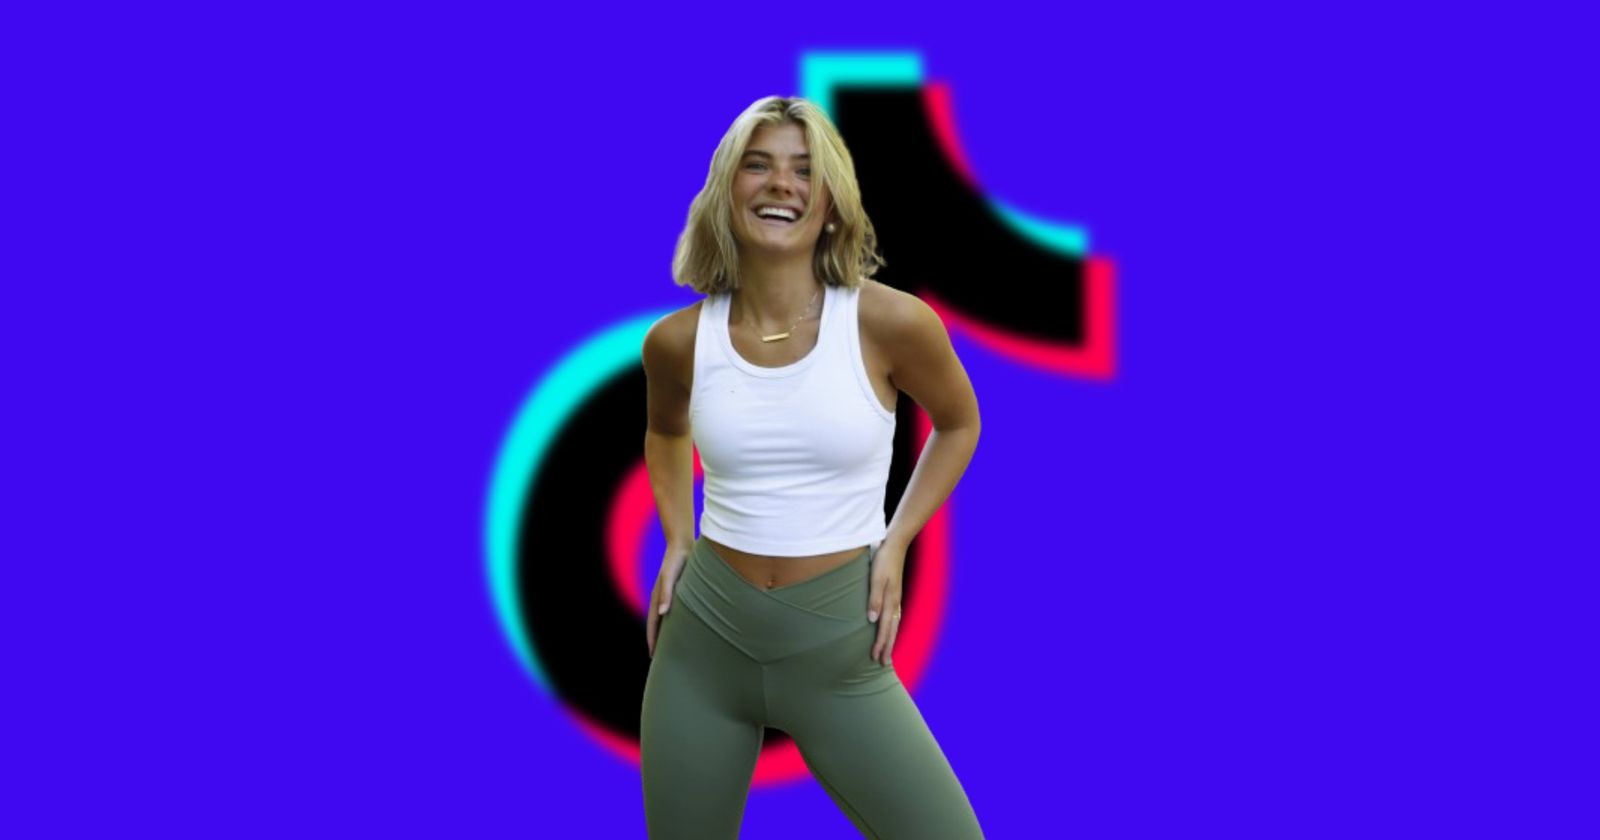 what is the meaning in one leg leggings｜TikTok Search